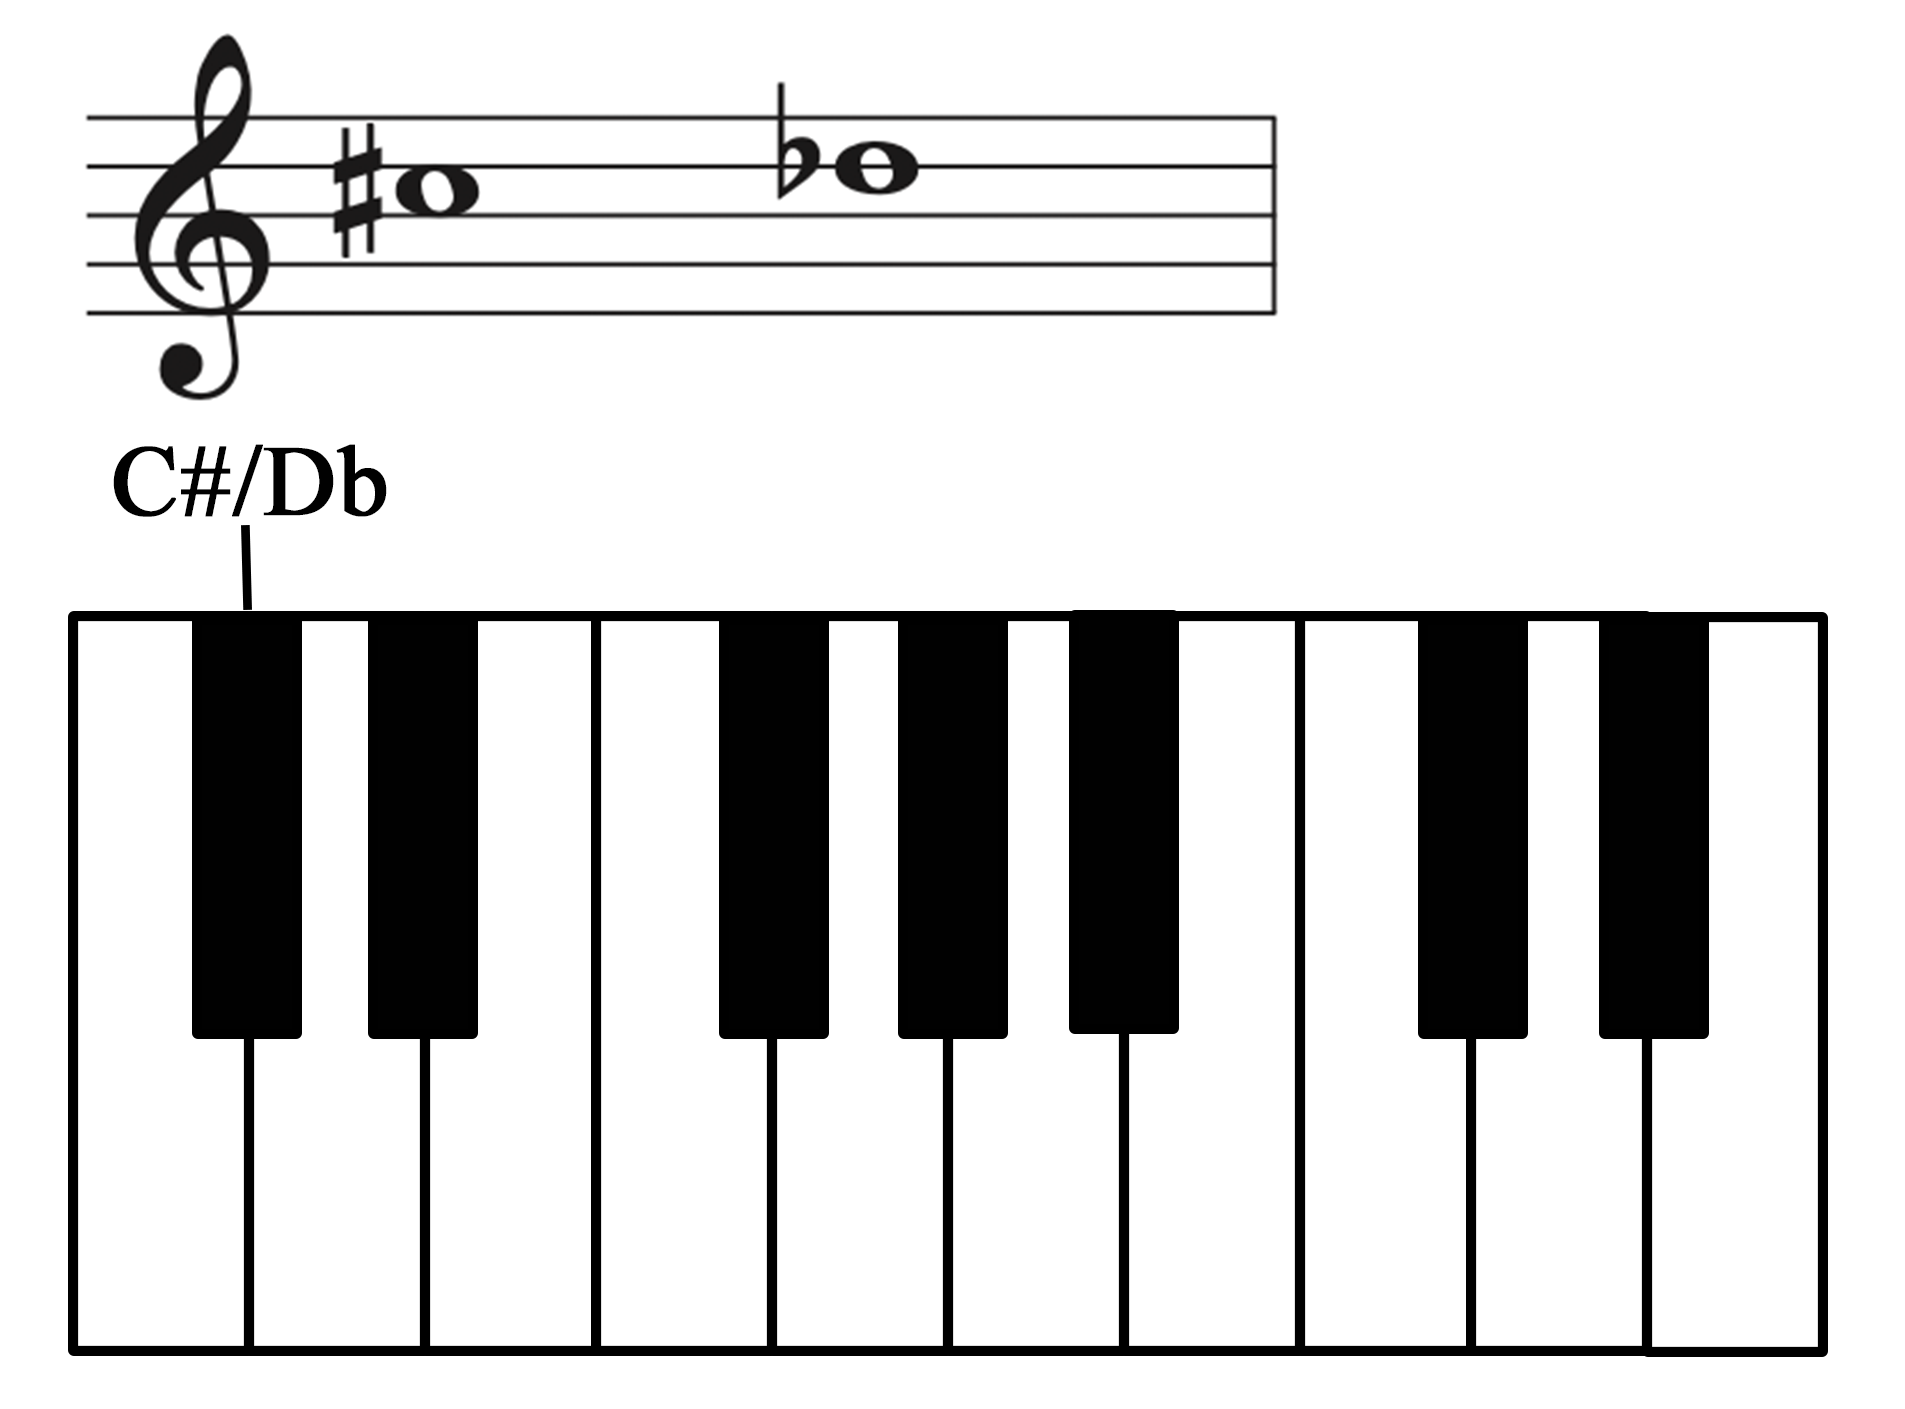 C-sharp and D-flat labeled on a keyboard and on a staff.